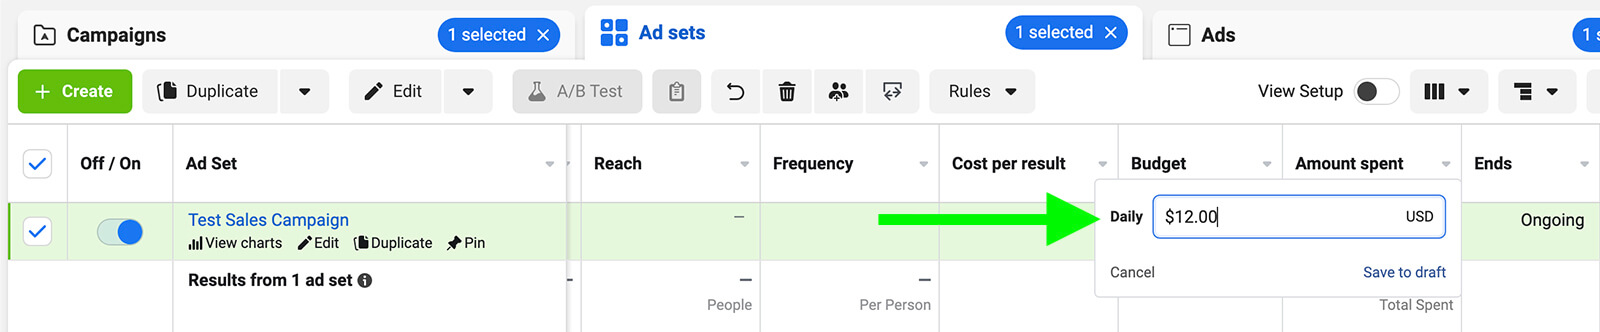 how-to-increase-facebook-ad-spend-scale-vertically-increase-daily-budget-example-5